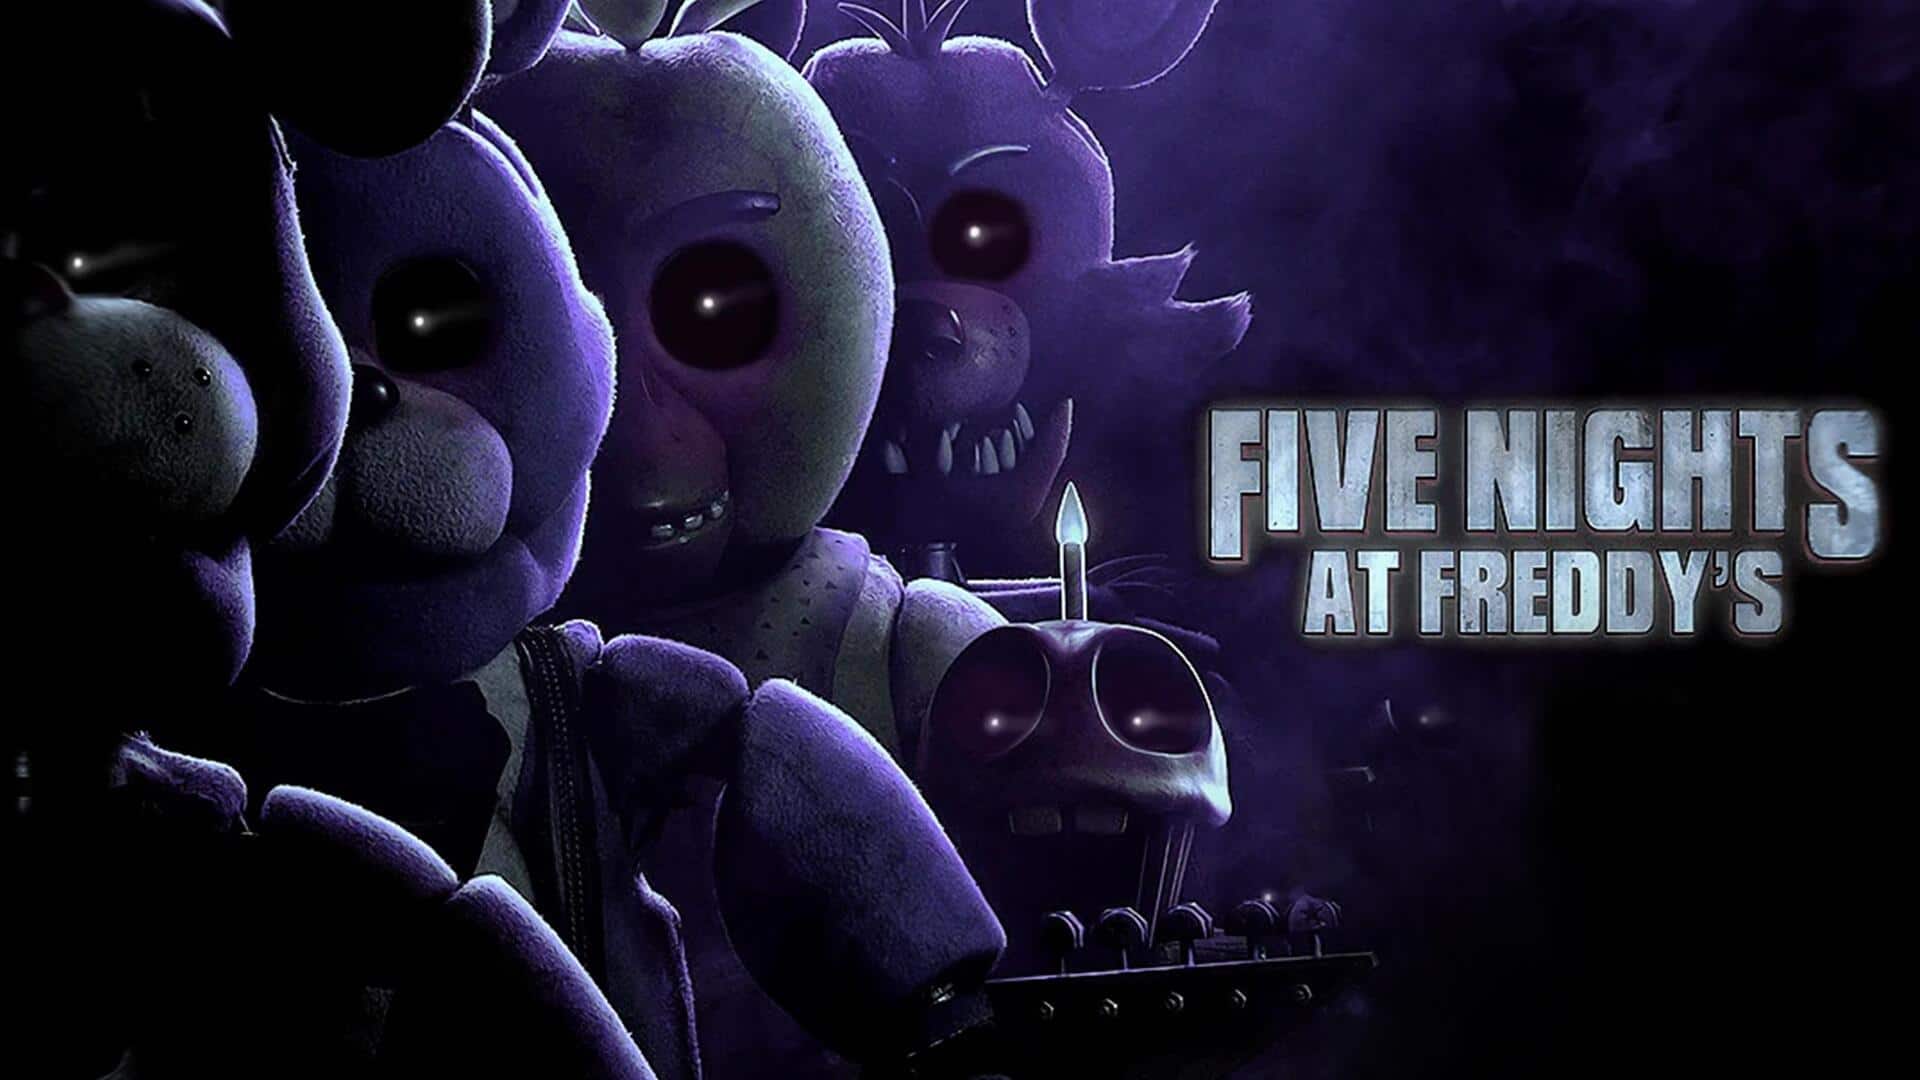 'Five Nights at Freddy's' cast, storyline, release date, box-office collection